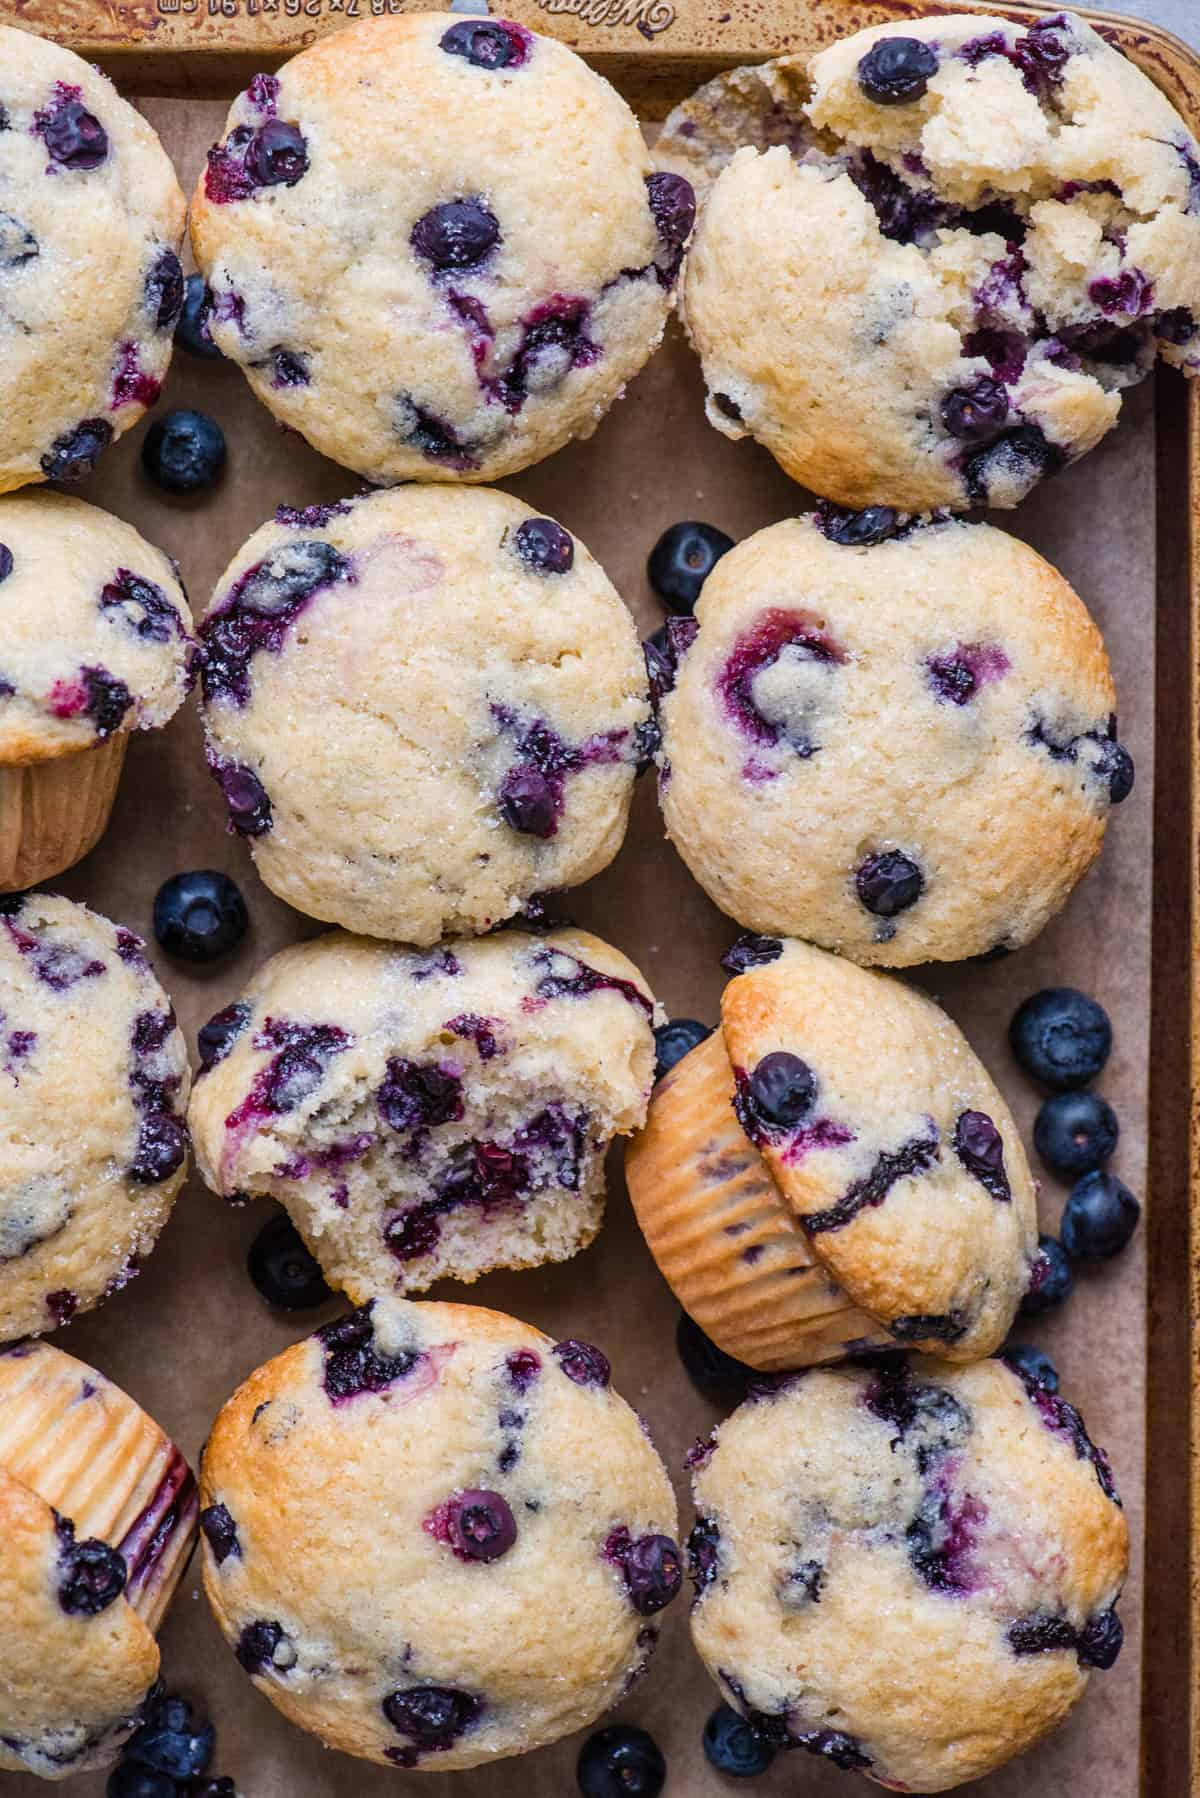 12 blueberry muffins arranged in a grid pattern on metal baking sheet